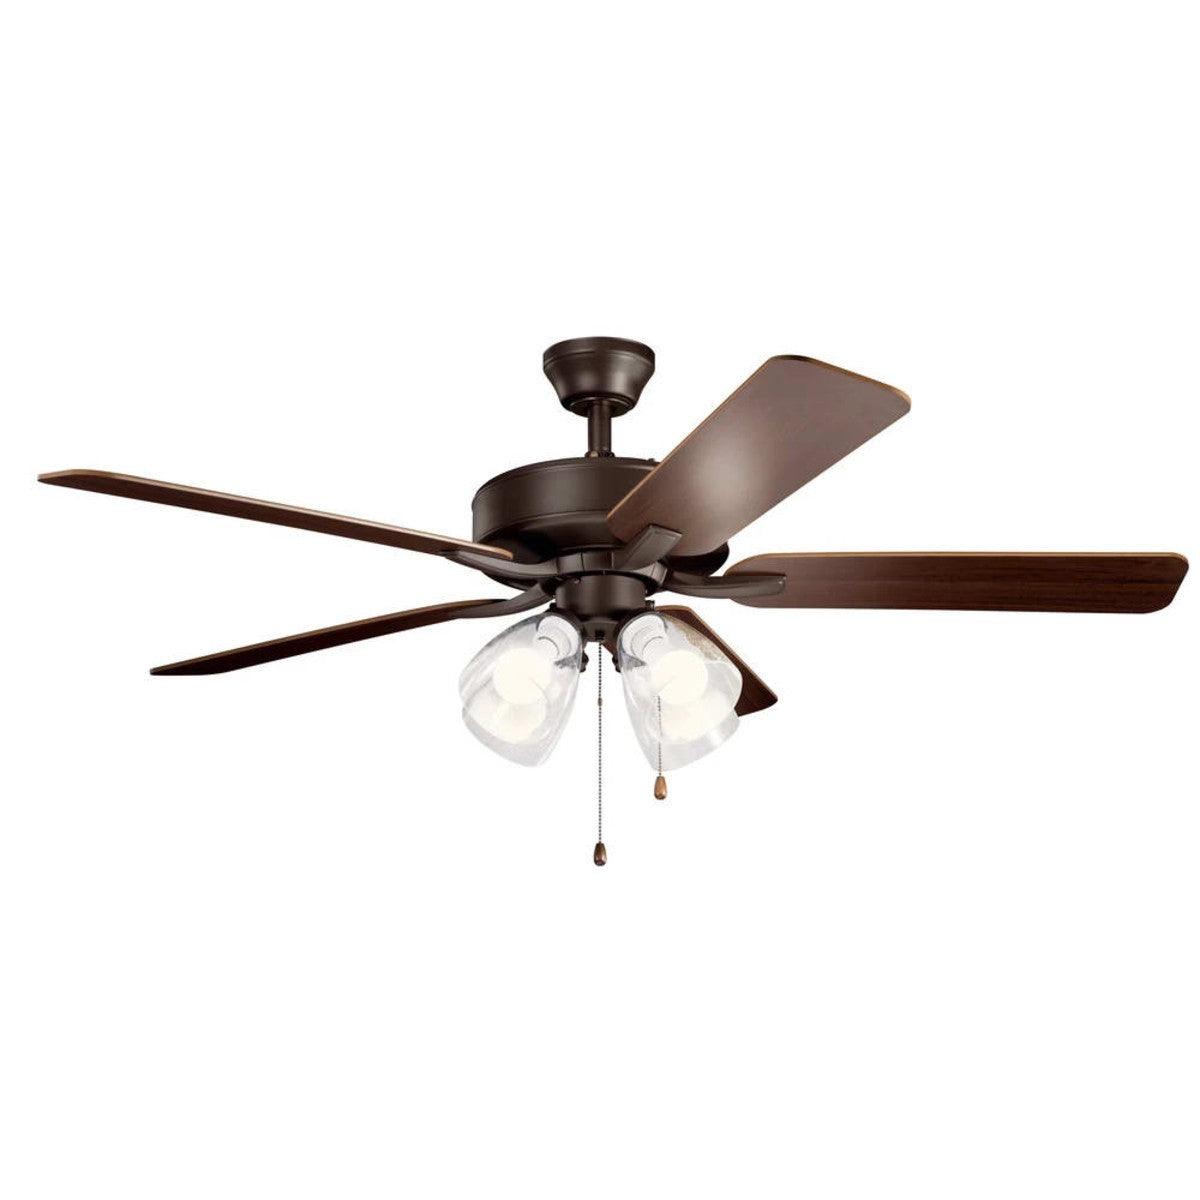 Basics Pro 52 Inch Ceiling Fan With Light, Clear Glass, Pull Chain Included